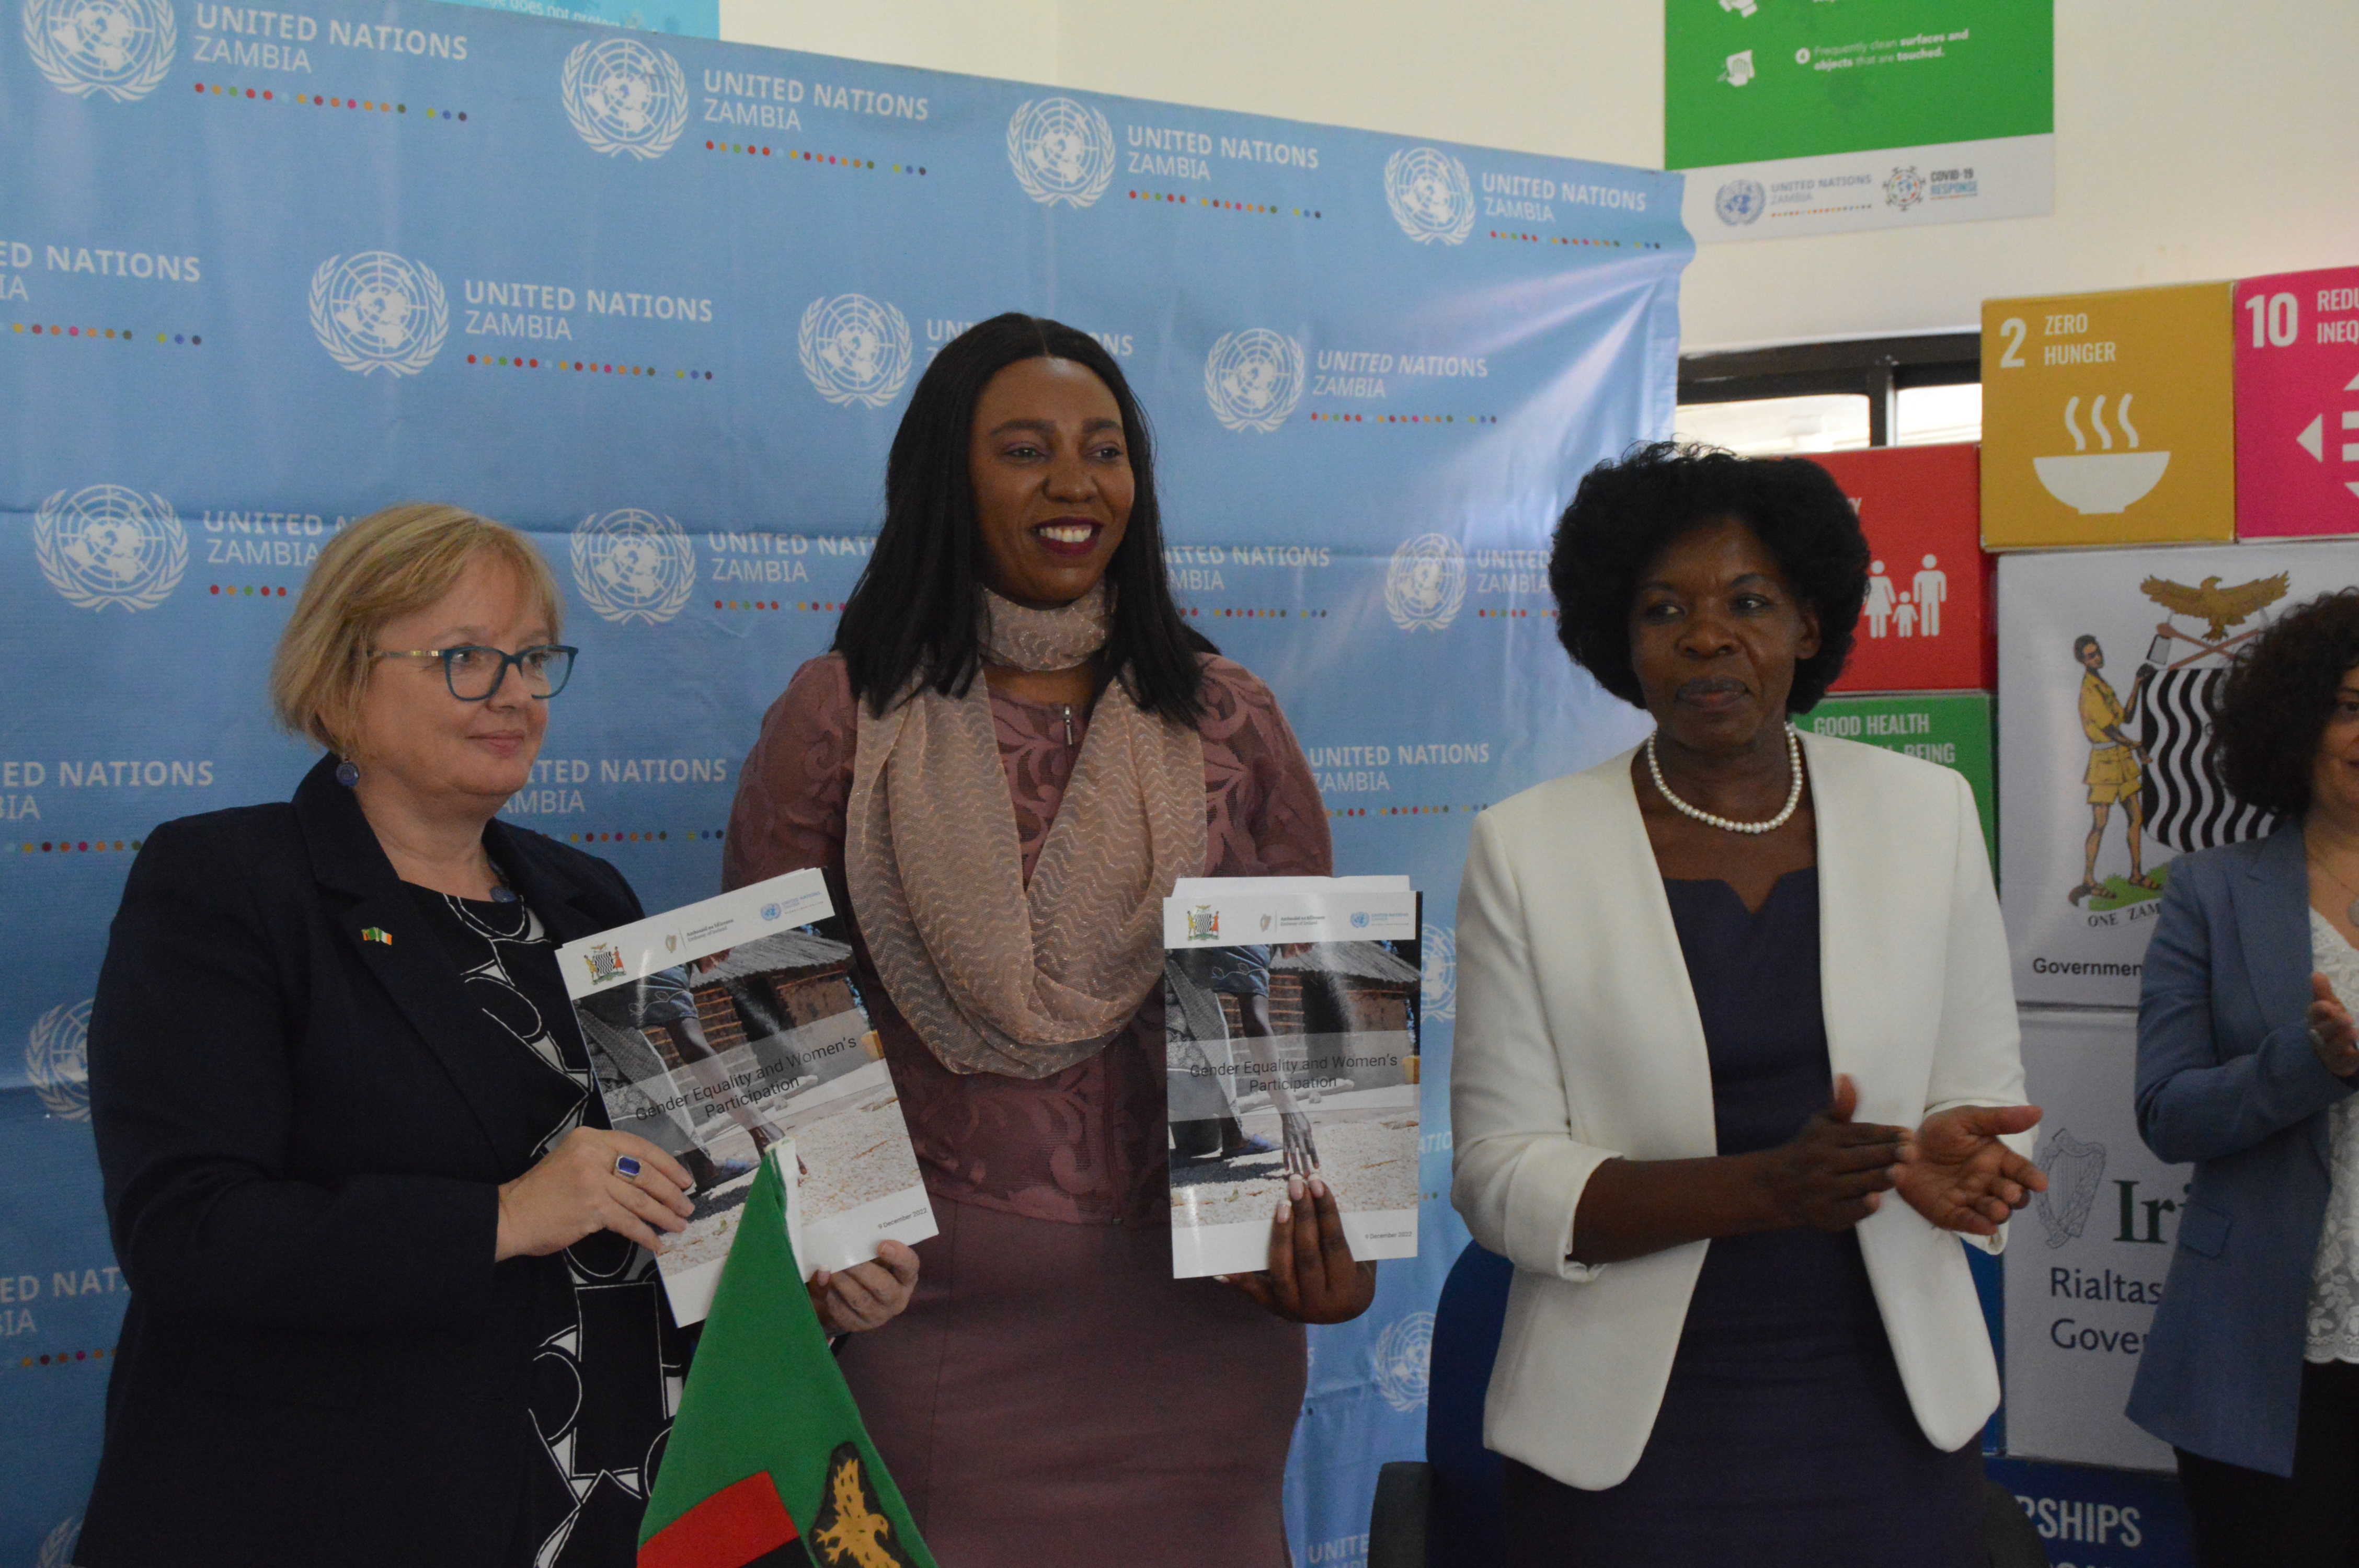 Image of the Irish Ambassador to Zambia, Brough Carr (L), the Permanent Secretary for the Gender Division, Mainga Kabika (M), and the UN Zambia Resident Coordinator, Beatrice Mutali (R) at the Official Signing of the Joint Programme on Gender Equality and Women’s Participation Initiative in Lusaka, Lusaka Province